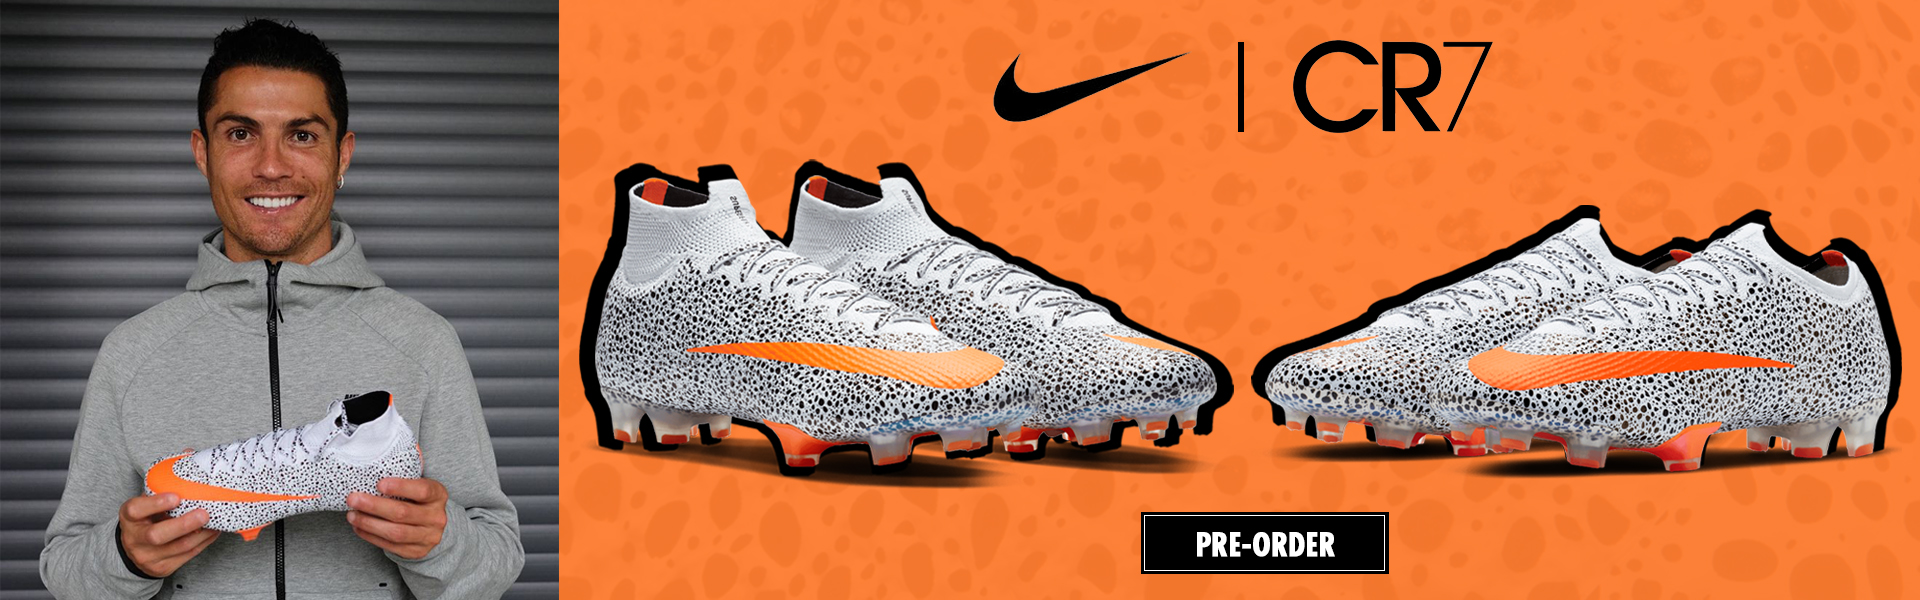 Nike 's CR7 collection dramatically attitude and irreverence of a .